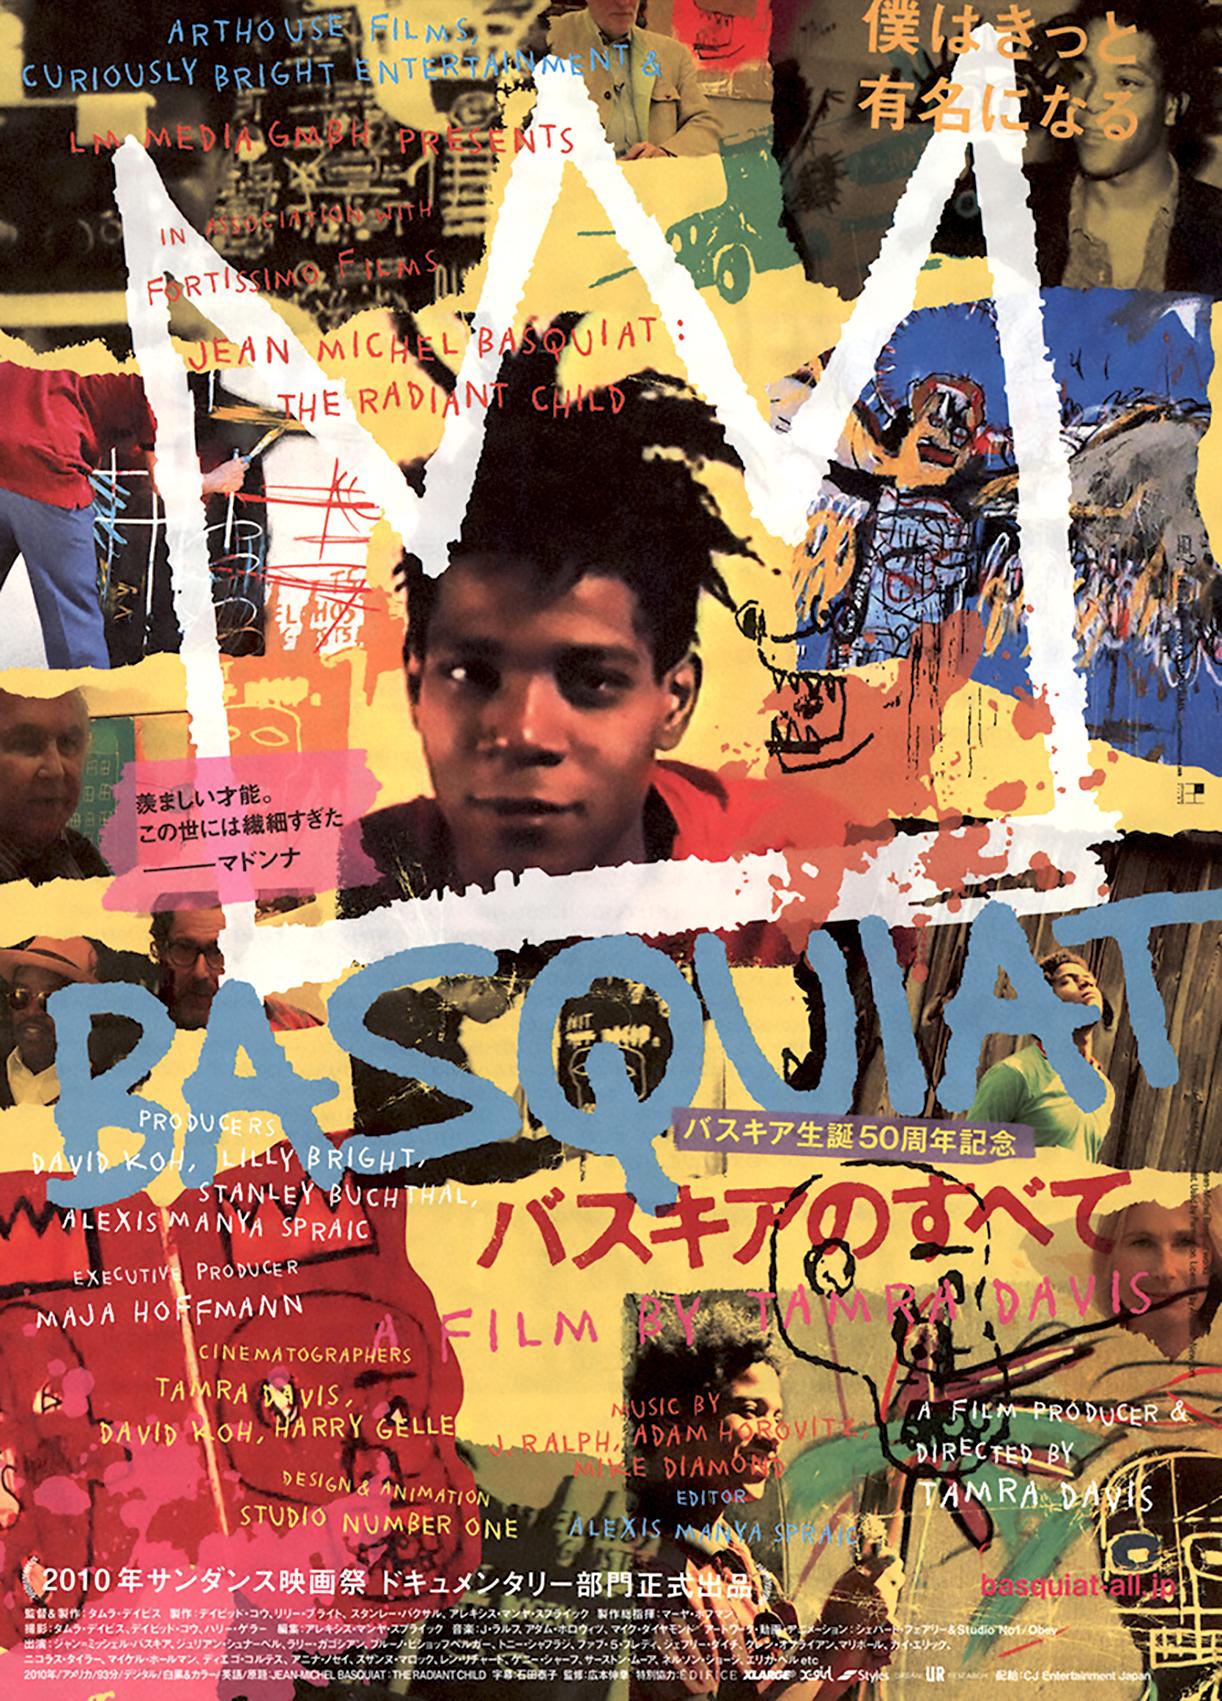 Basquiat Movie Posters: set of 4 works:
Vintage Basquiat Japan movie posters/ flyers; comprised of two posters from the documentary 'Boom For Real The Late Teenage Years of Jean-Michel Basquiat'; 'Basquiat Radiant Child' (director Tamra Davis) and